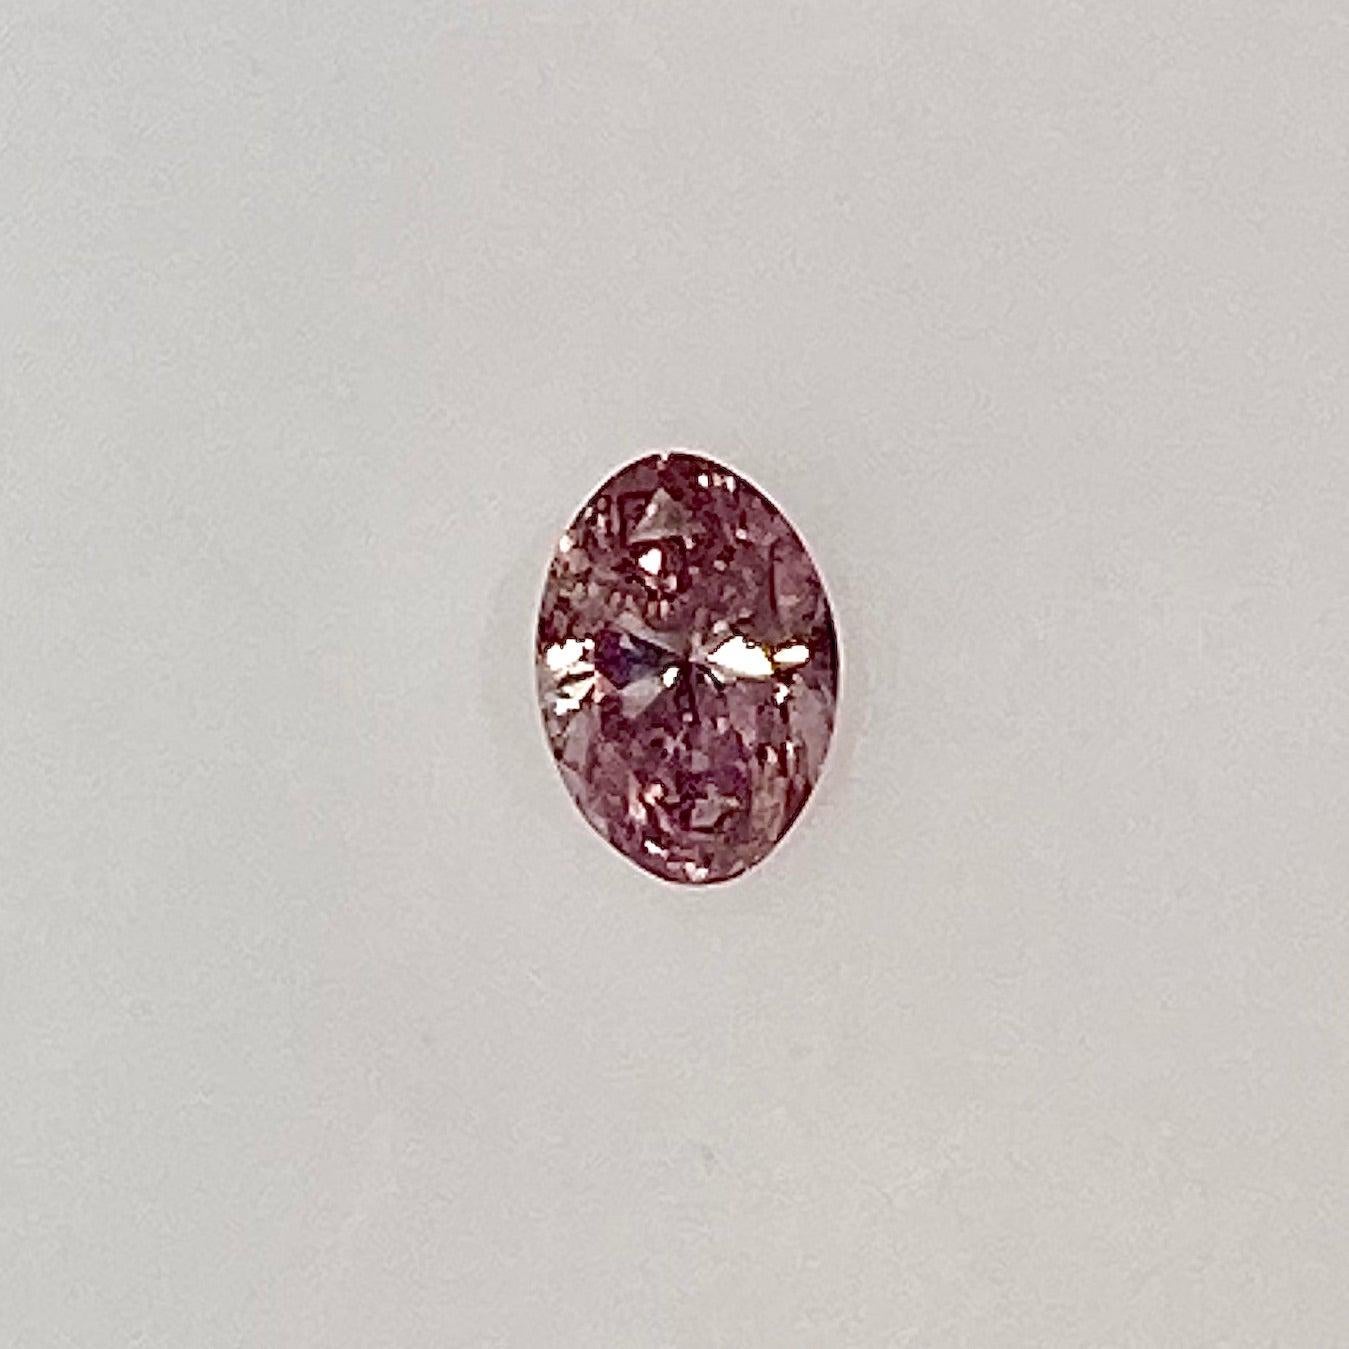 0.29 CARAT ROUND NATURAL FANCY PURPLISH PINK EVEN LOOSE PINK DIAMOND GIA CERTIFIED 0.29 CT FPP BY MIKE NEKTA NYC

Shape and Cutting Style : Oval Brilliant 

Measurements: 5.2 x 3.6 x 2.3 mm
Carat Weight : 0.29 carat 
Color Grade : Fancy Purplish